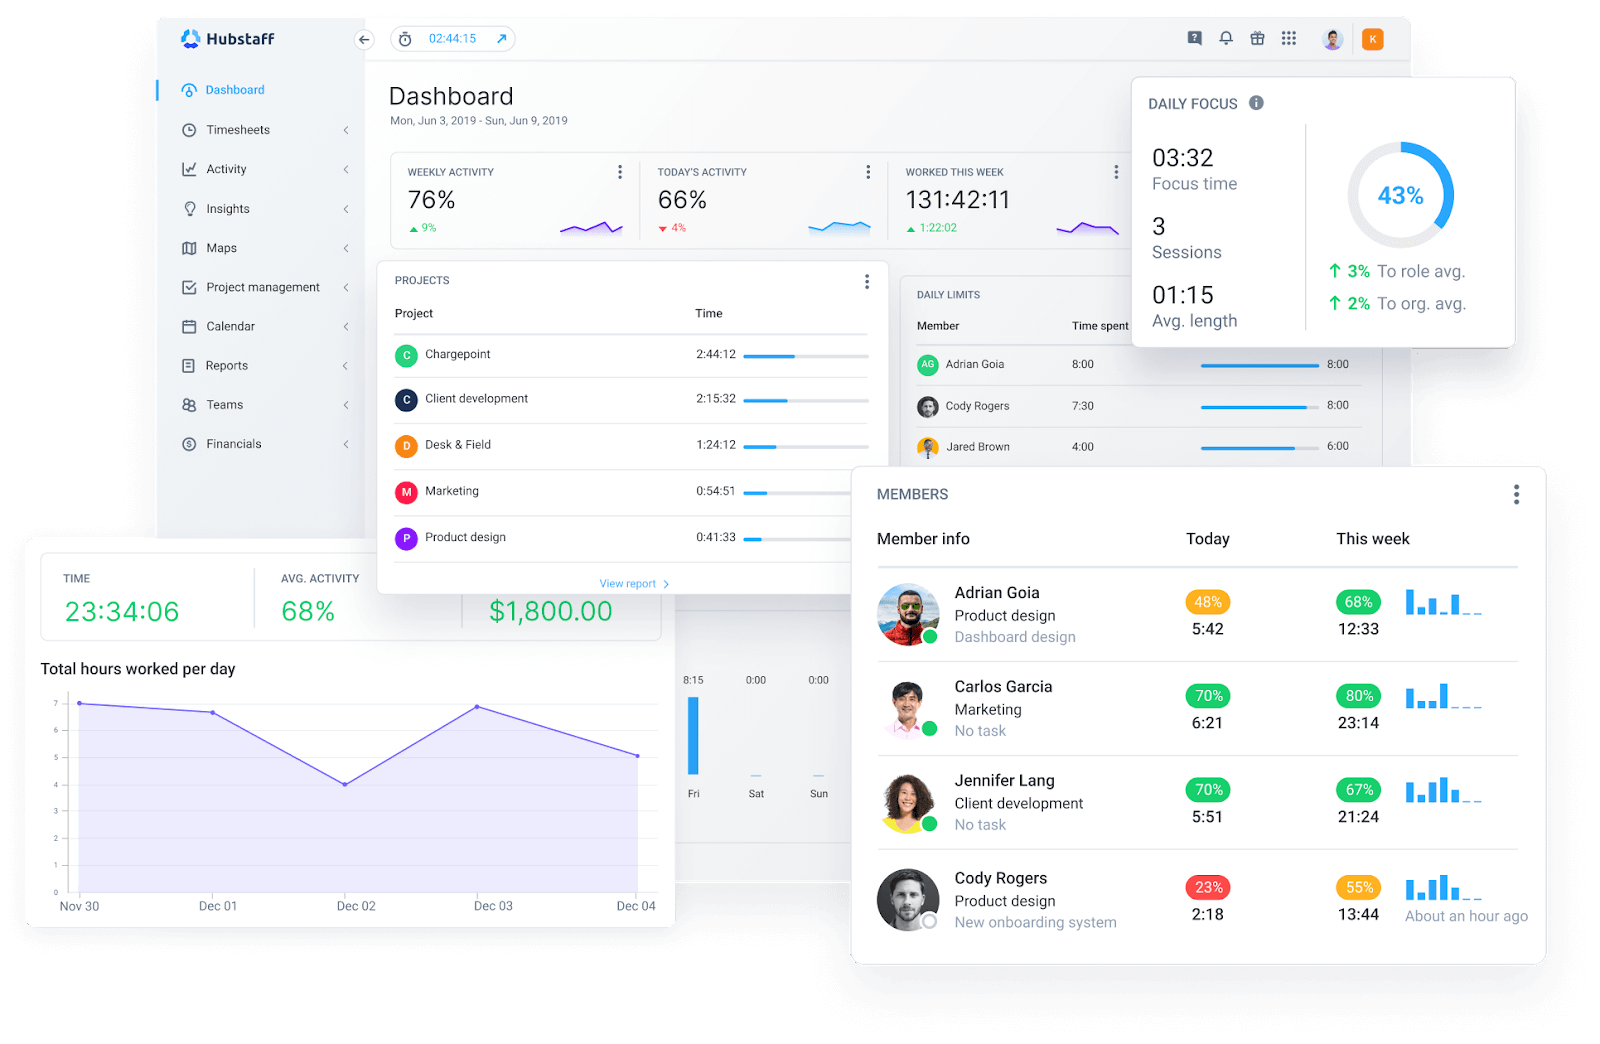 Hubstaff dashboard with activity and productivity data.